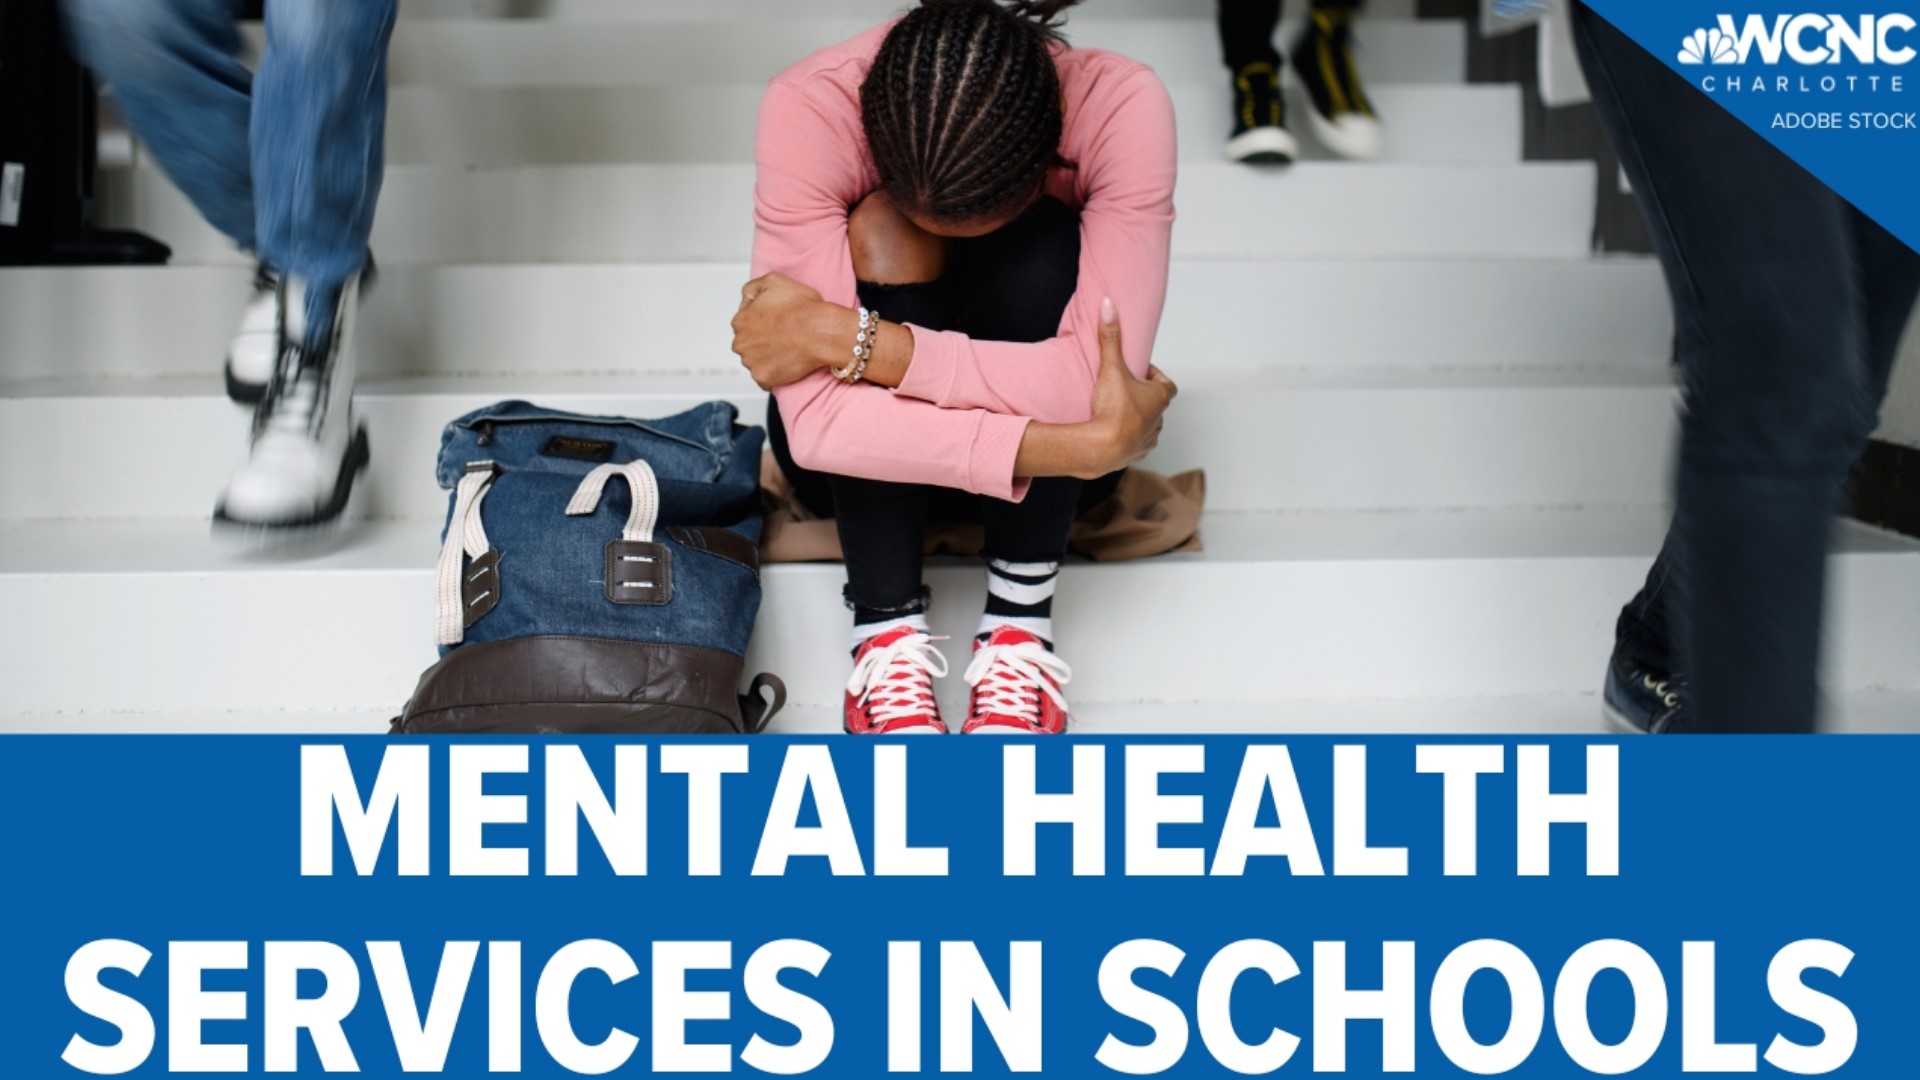 Last school year, Rock Hill Schools was the first school district in the area to create a mental health department.